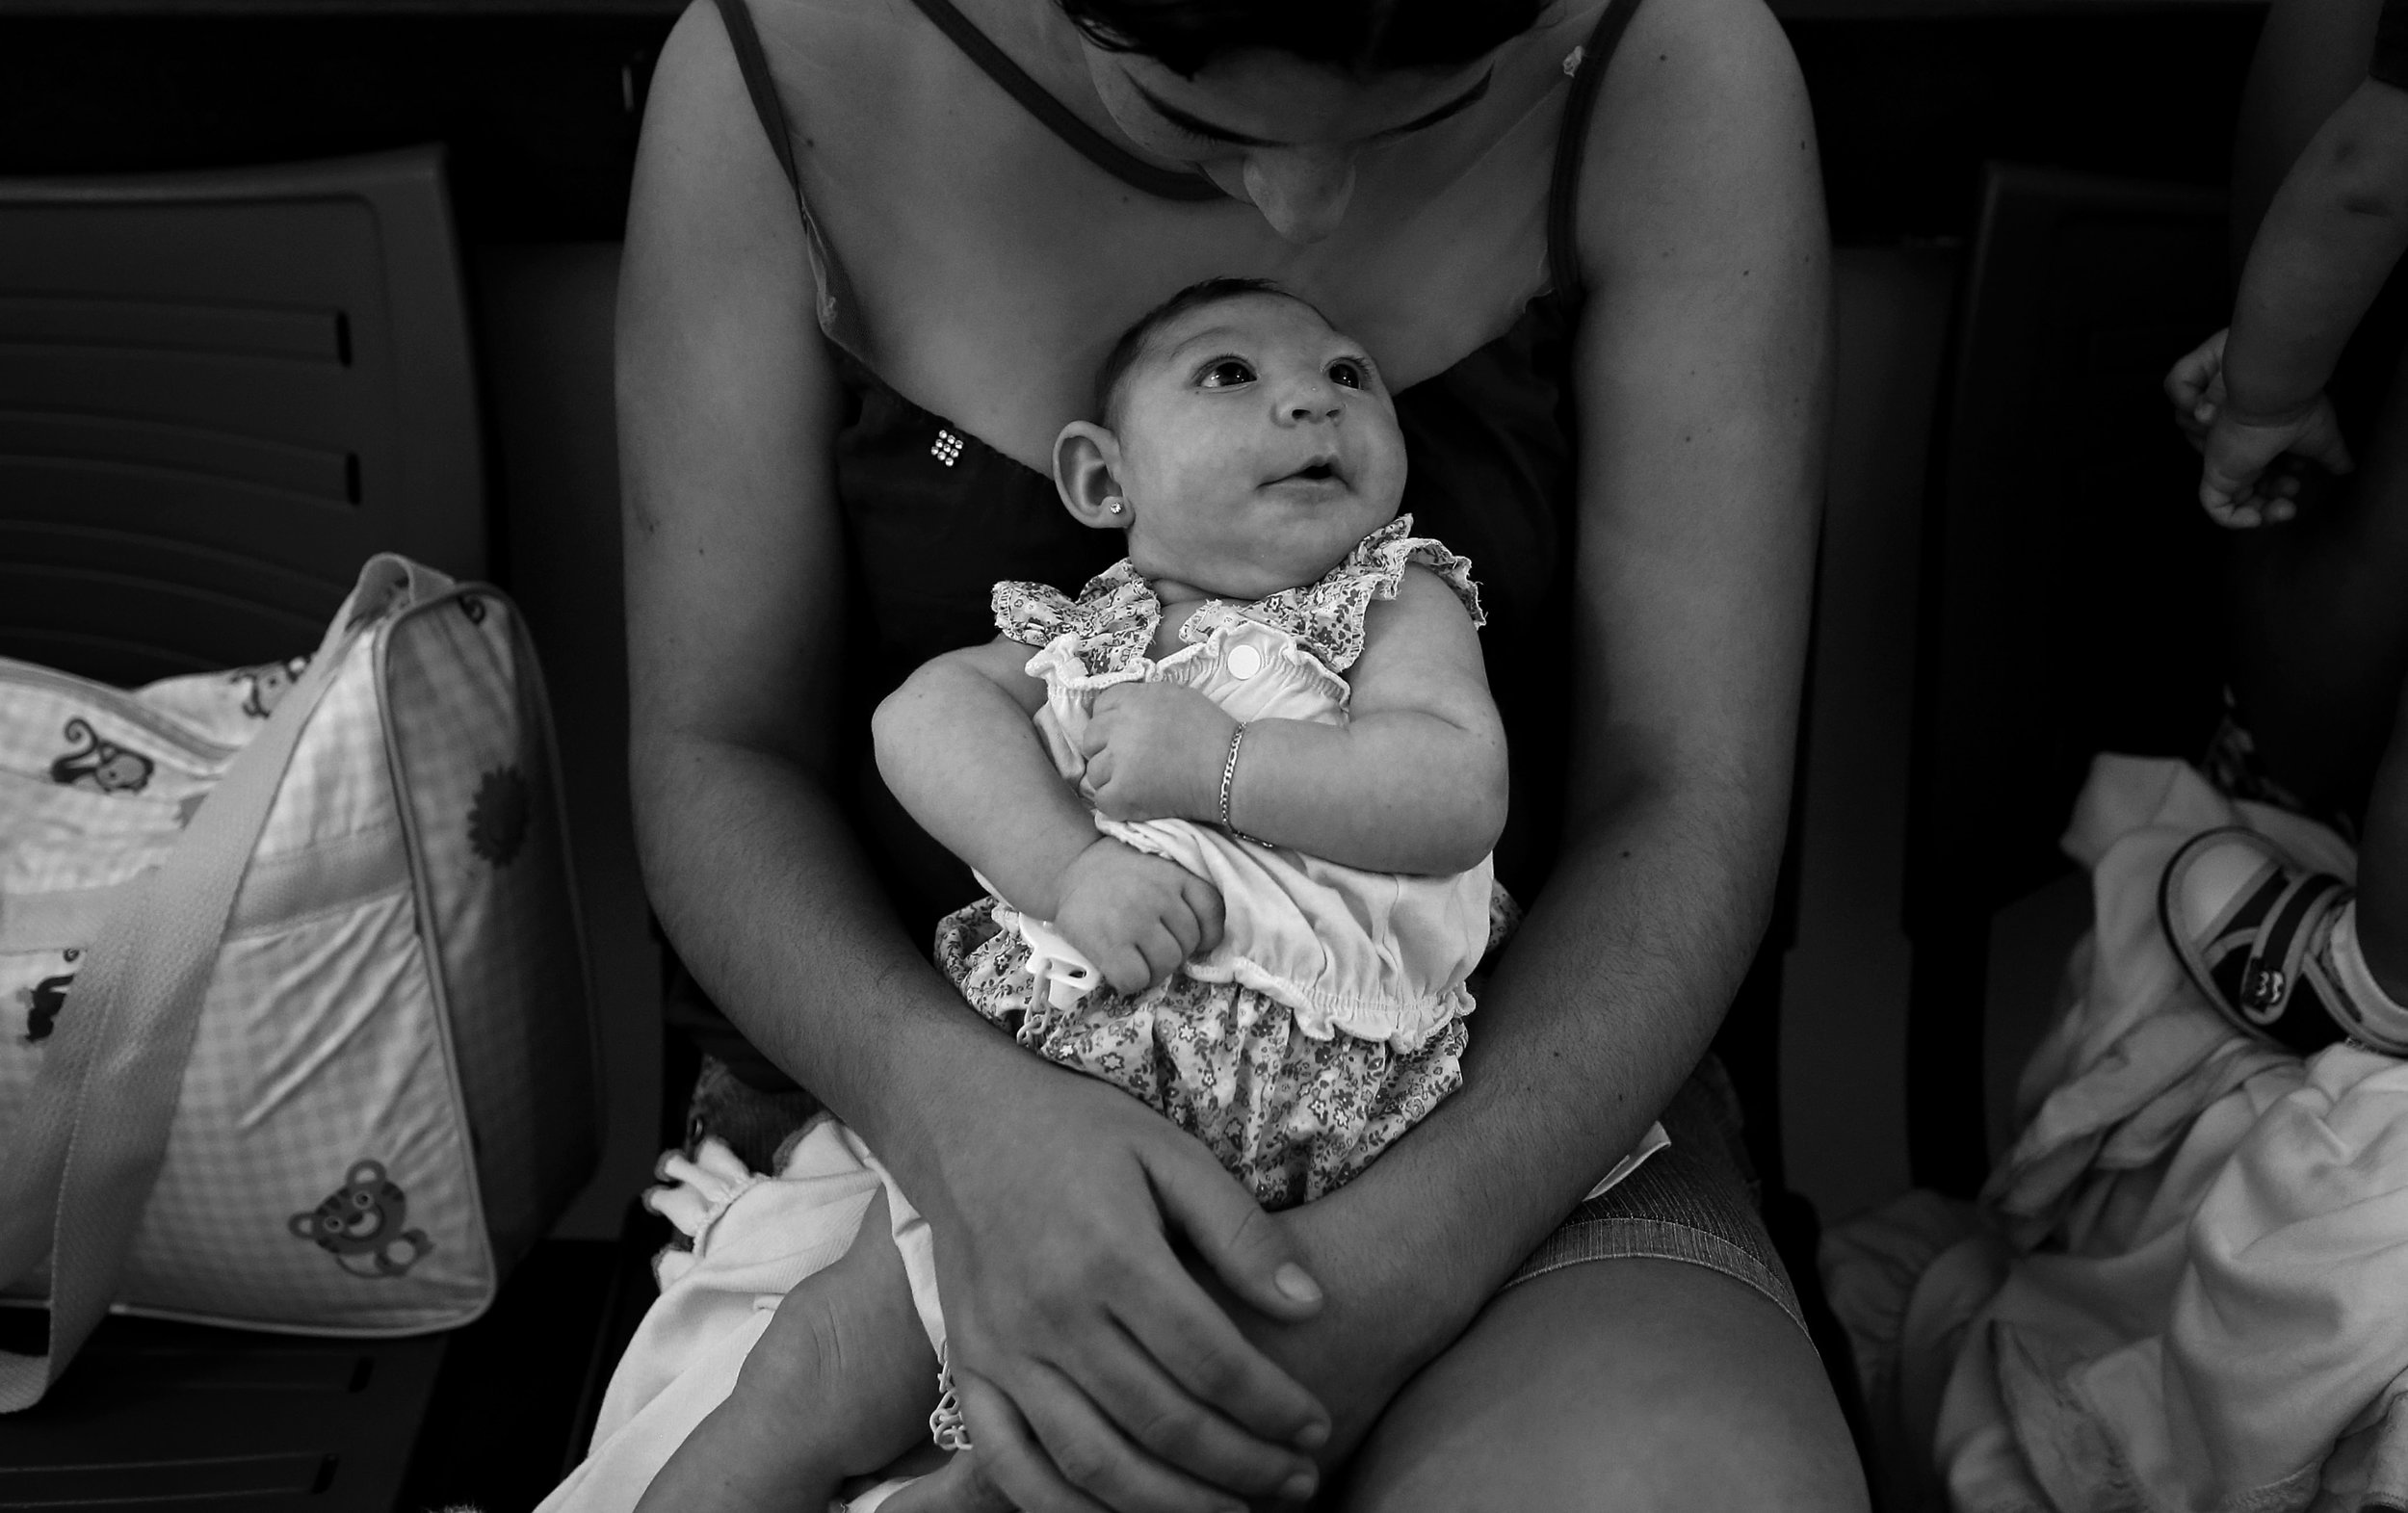  Maria Carolina Silva Floa, age 20, holds her baby, Maria Gabriela Silva Alves, 2 months, who was born with microcephaly, as she waits for her daughter’s physiotherapy appointment at Pedro 1 Municipal Hospital in Campina Grande, Brazil. Maria and oth